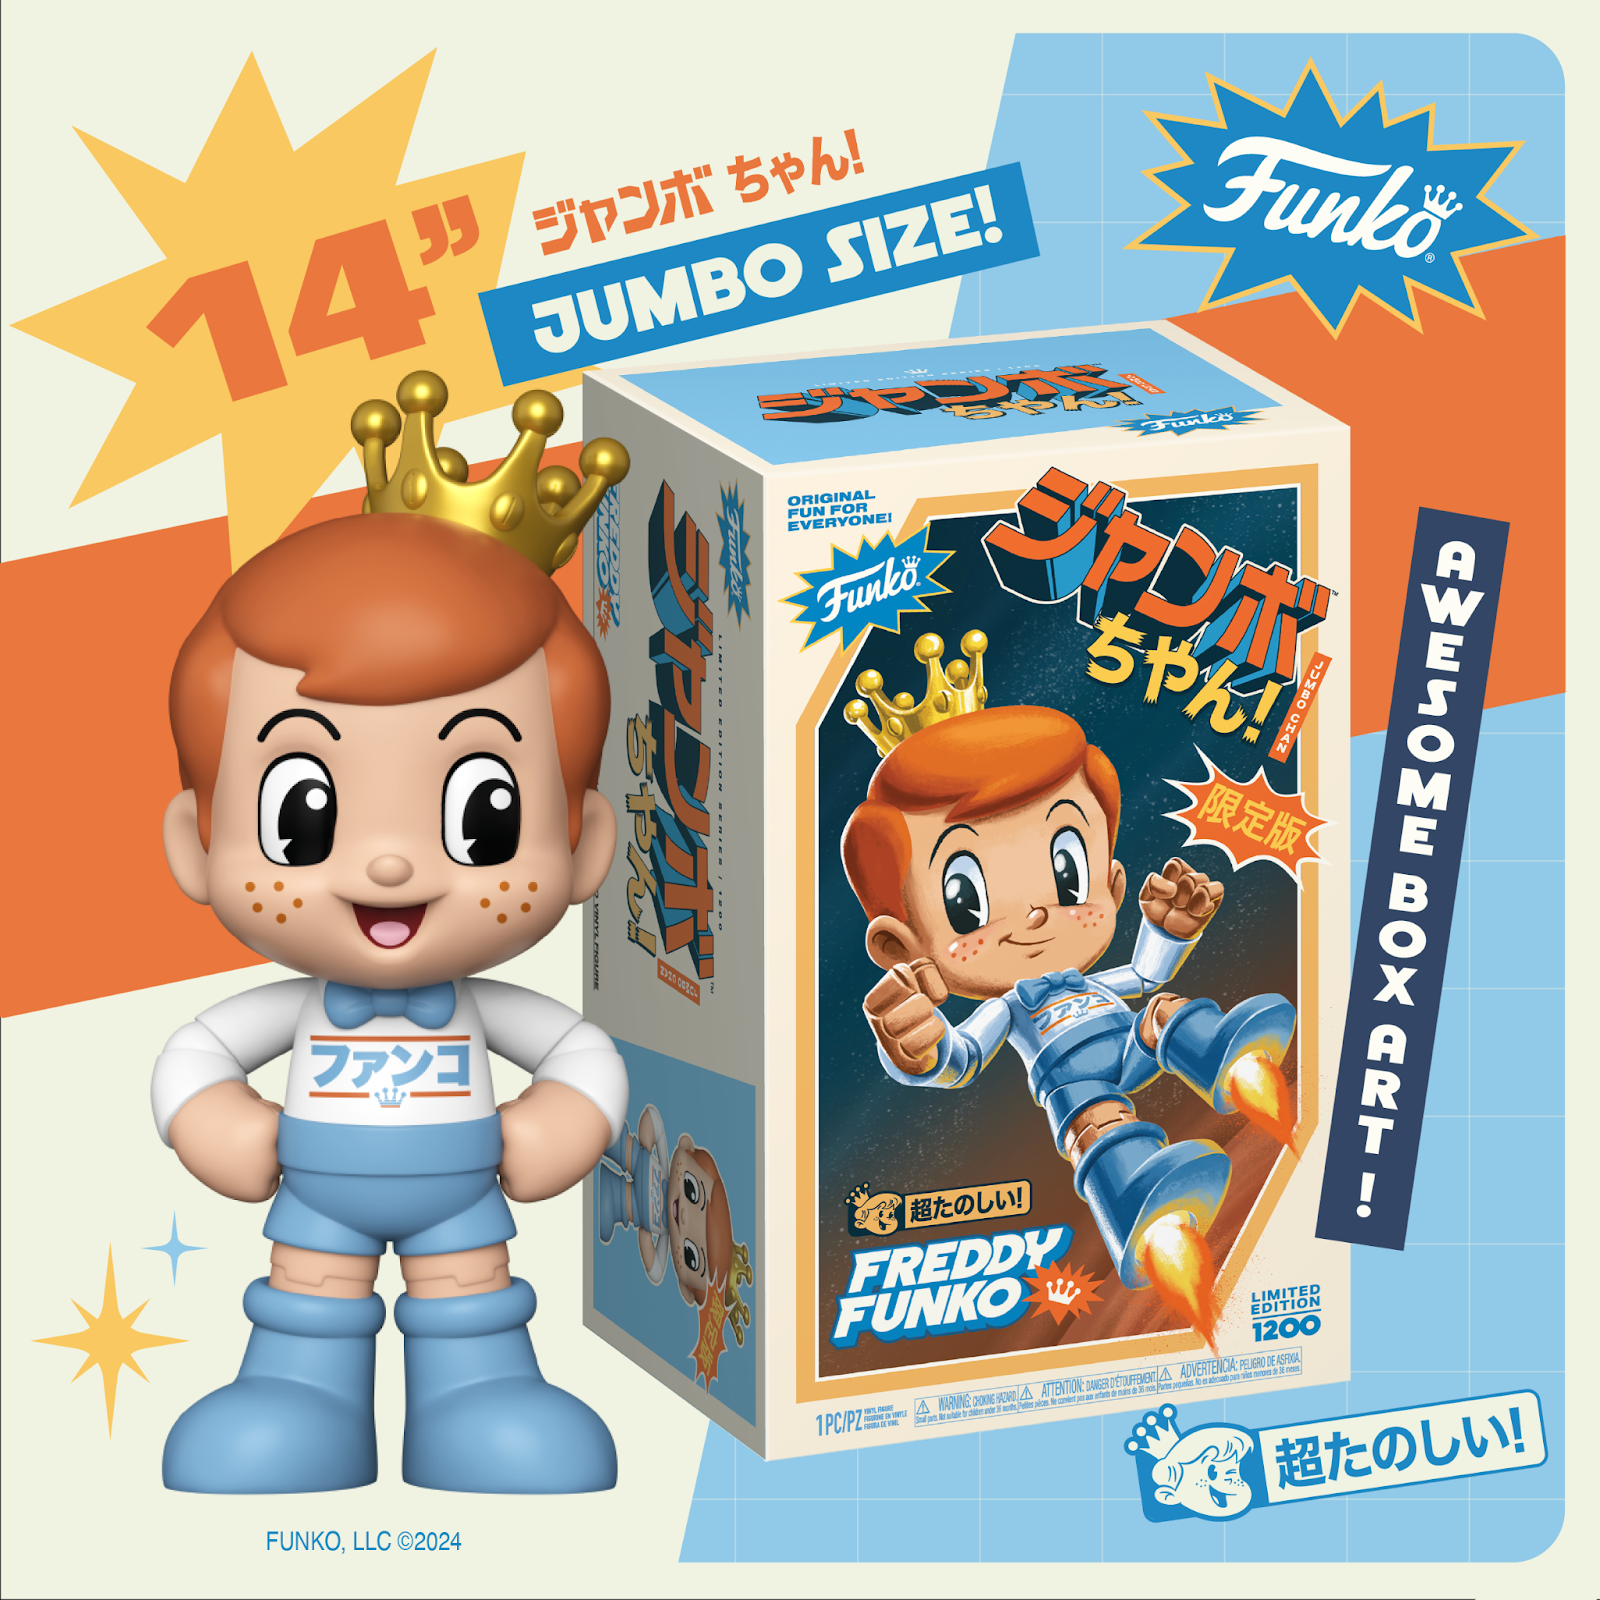 Funko’s Latest Premium Collectible, Jumbo Chan, Available For Pre-Order Now!